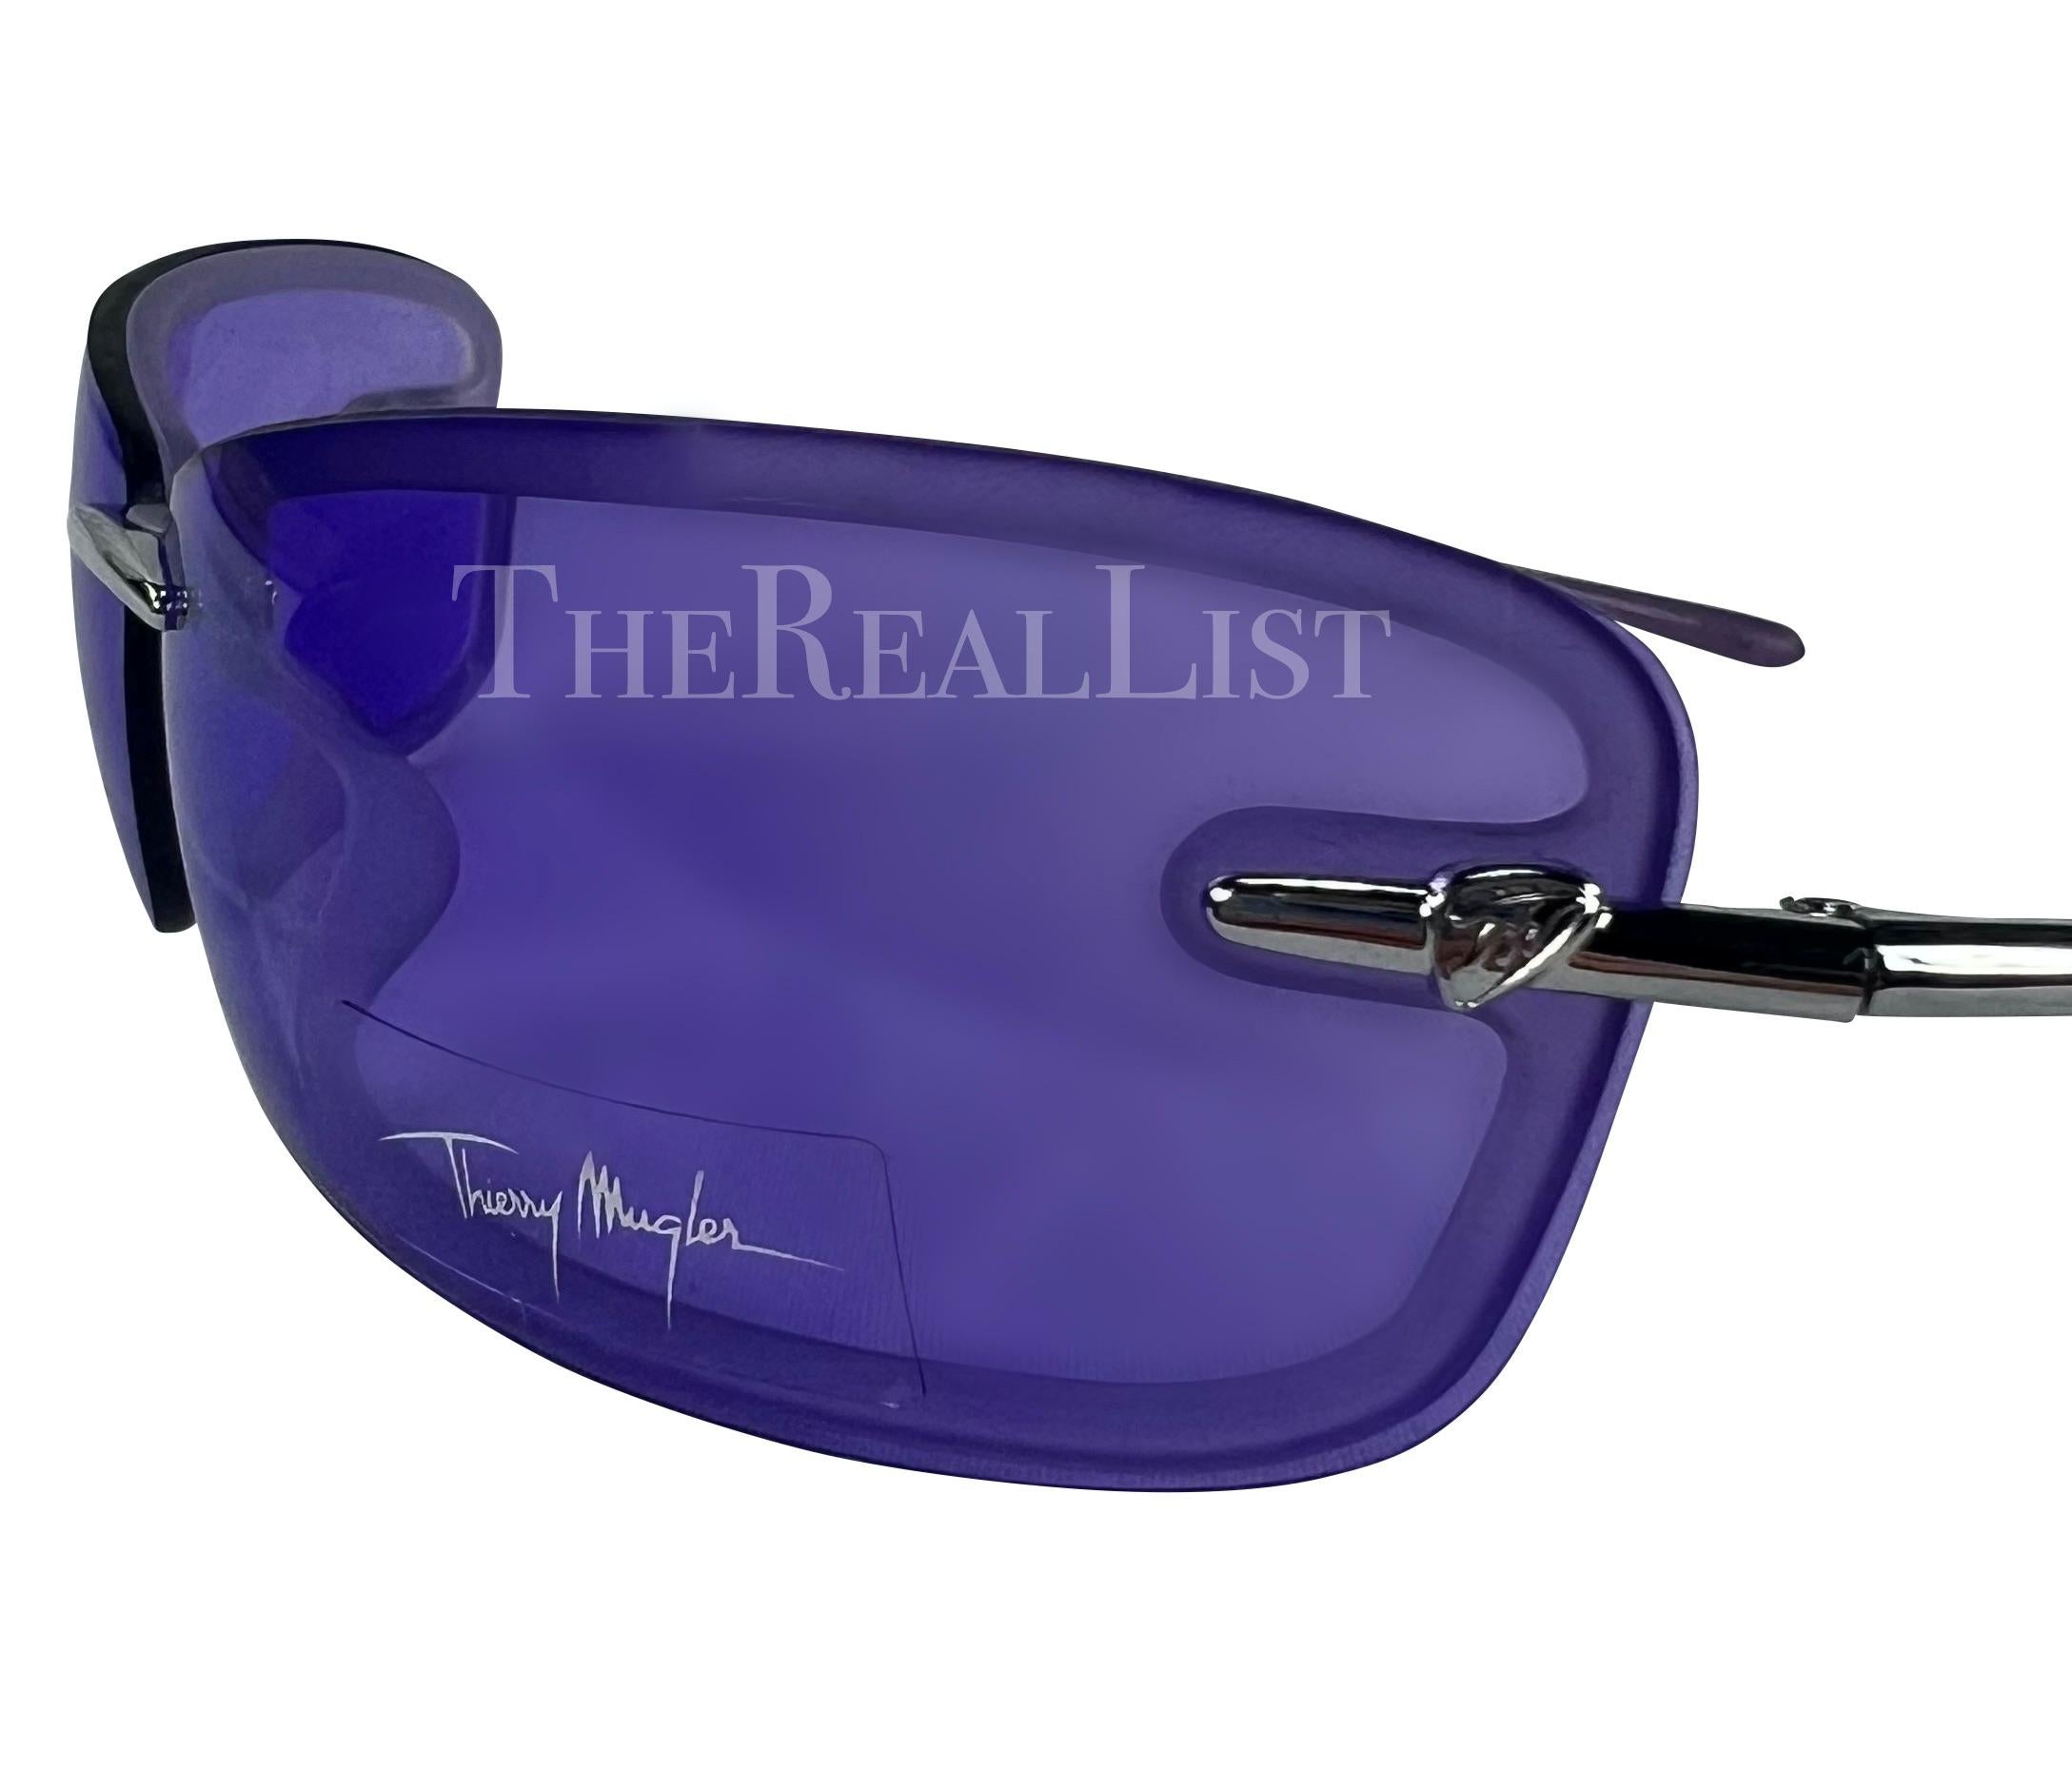 NWT Early 2000s Thierry Mugler Purple Rimless Rectangular Sunglasses In Excellent Condition For Sale In West Hollywood, CA